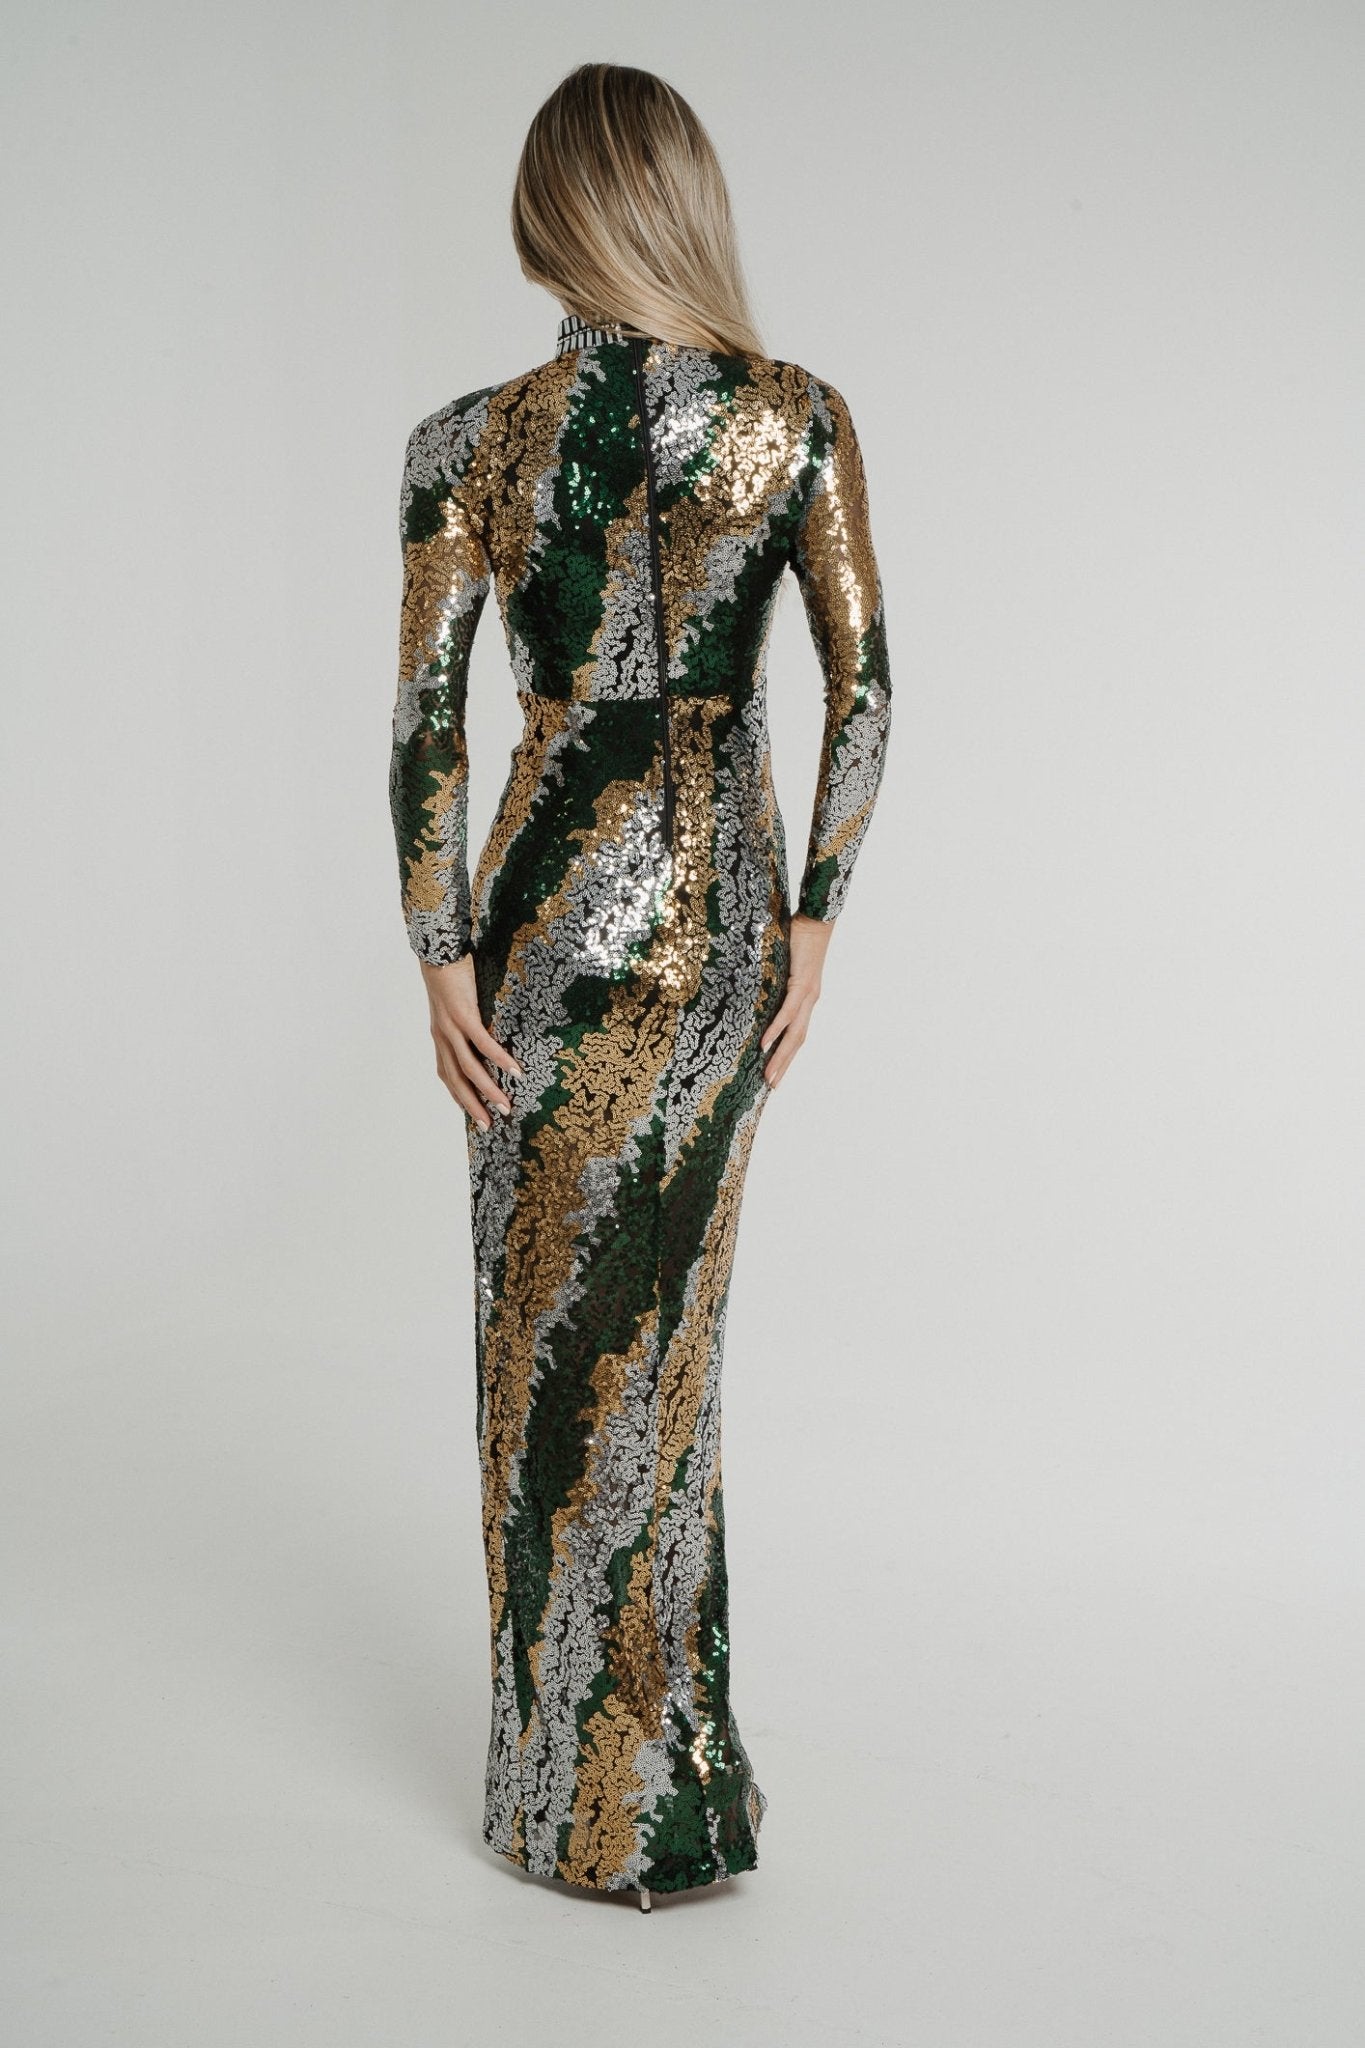 Holly Sequin Maxi Dress In Green Mix - The Walk in Wardrobe